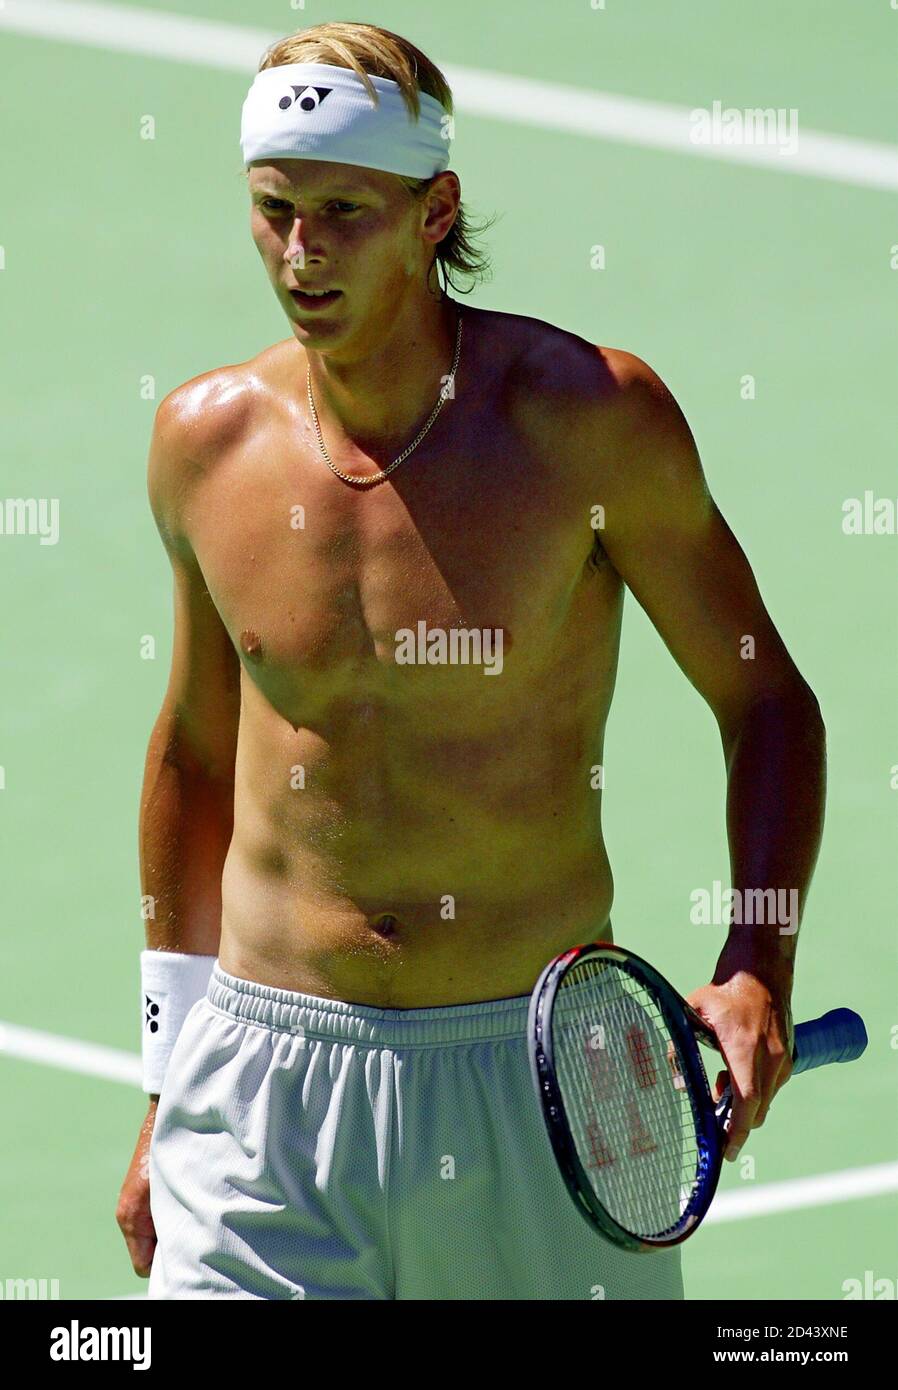 Joachim Johansson from Sweden practices without a shirt on Rod Laver Arena  during a warm-up for the Australian Open in Melbourne. Joachim Johansson  from Sweden practices without a shirt on Rod Laver